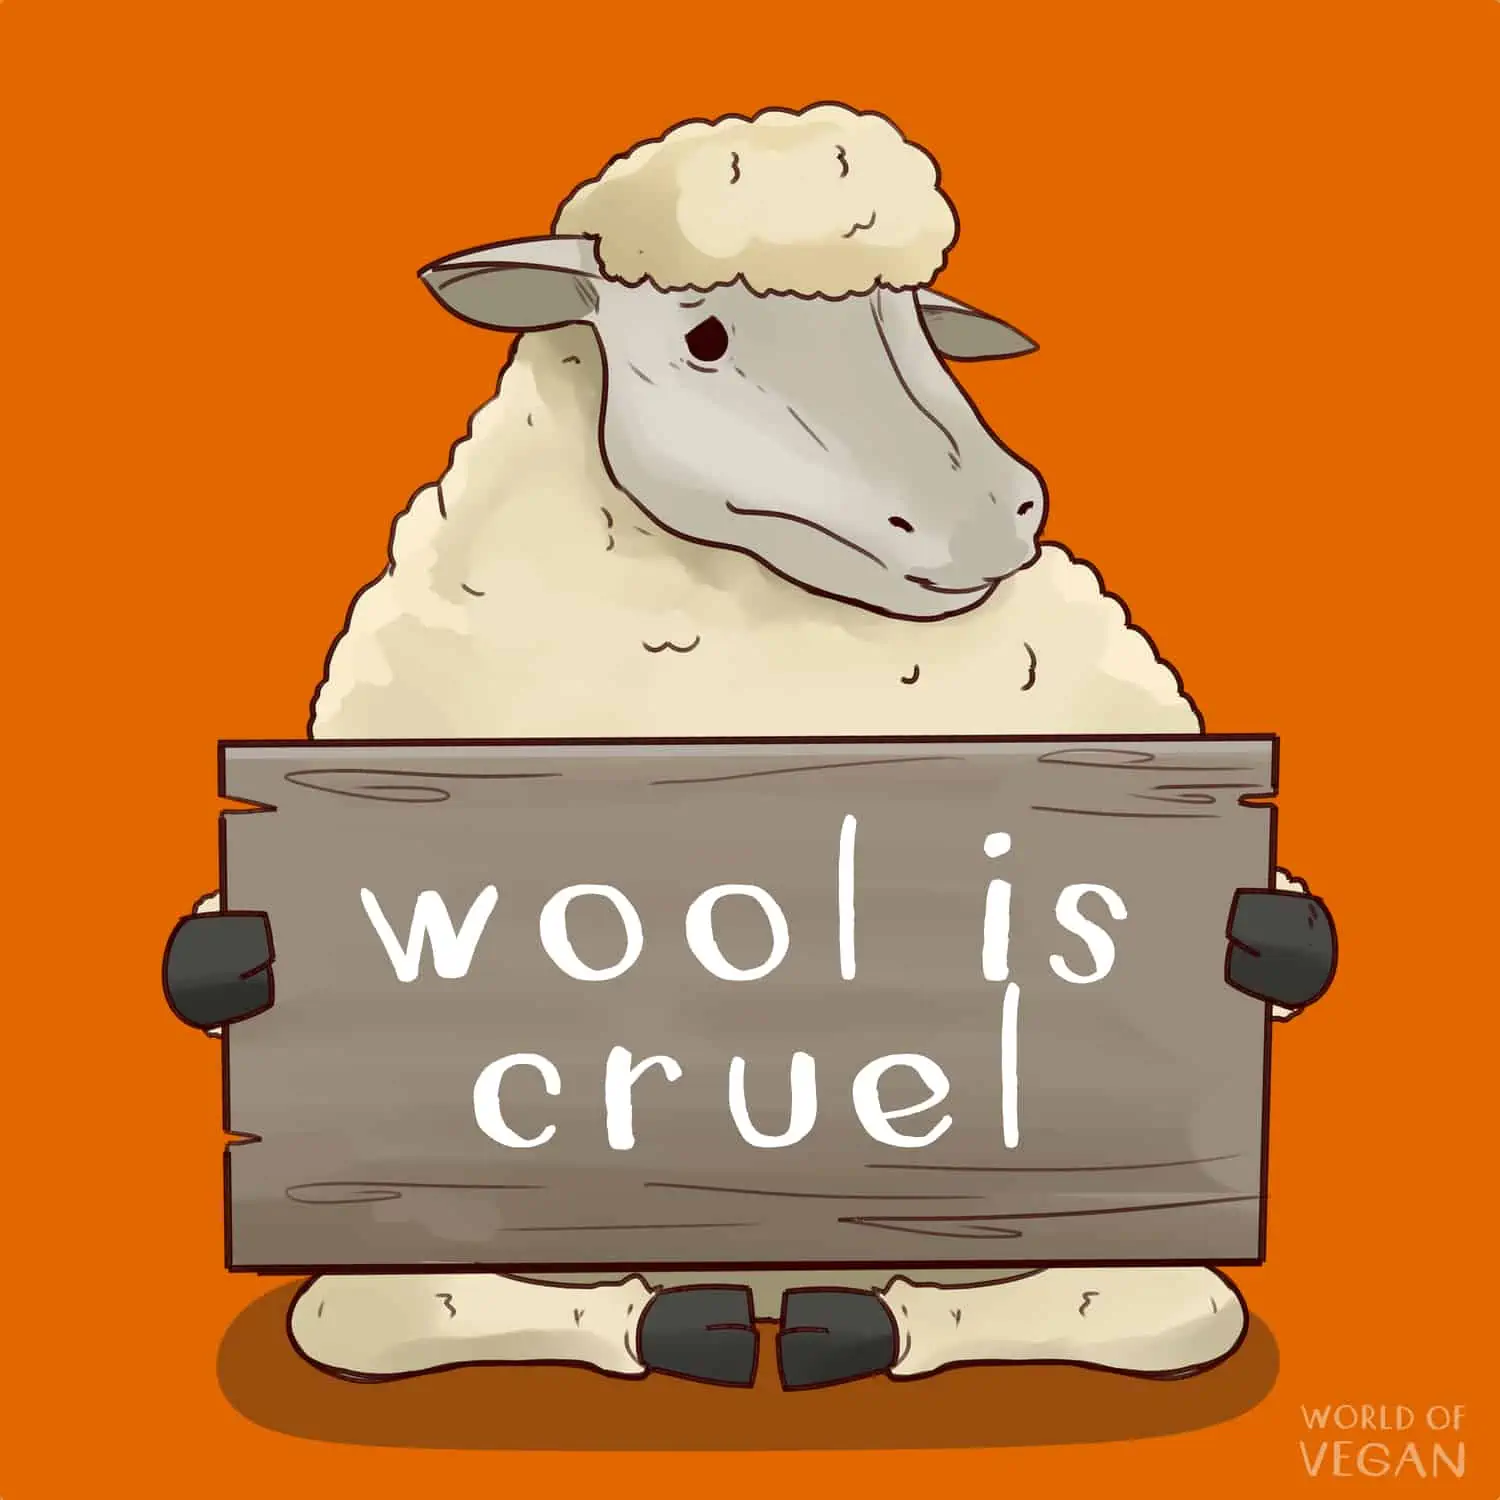 drawing of a sad-looking sheep holding a "wool is cruel" sign in front of an orange background